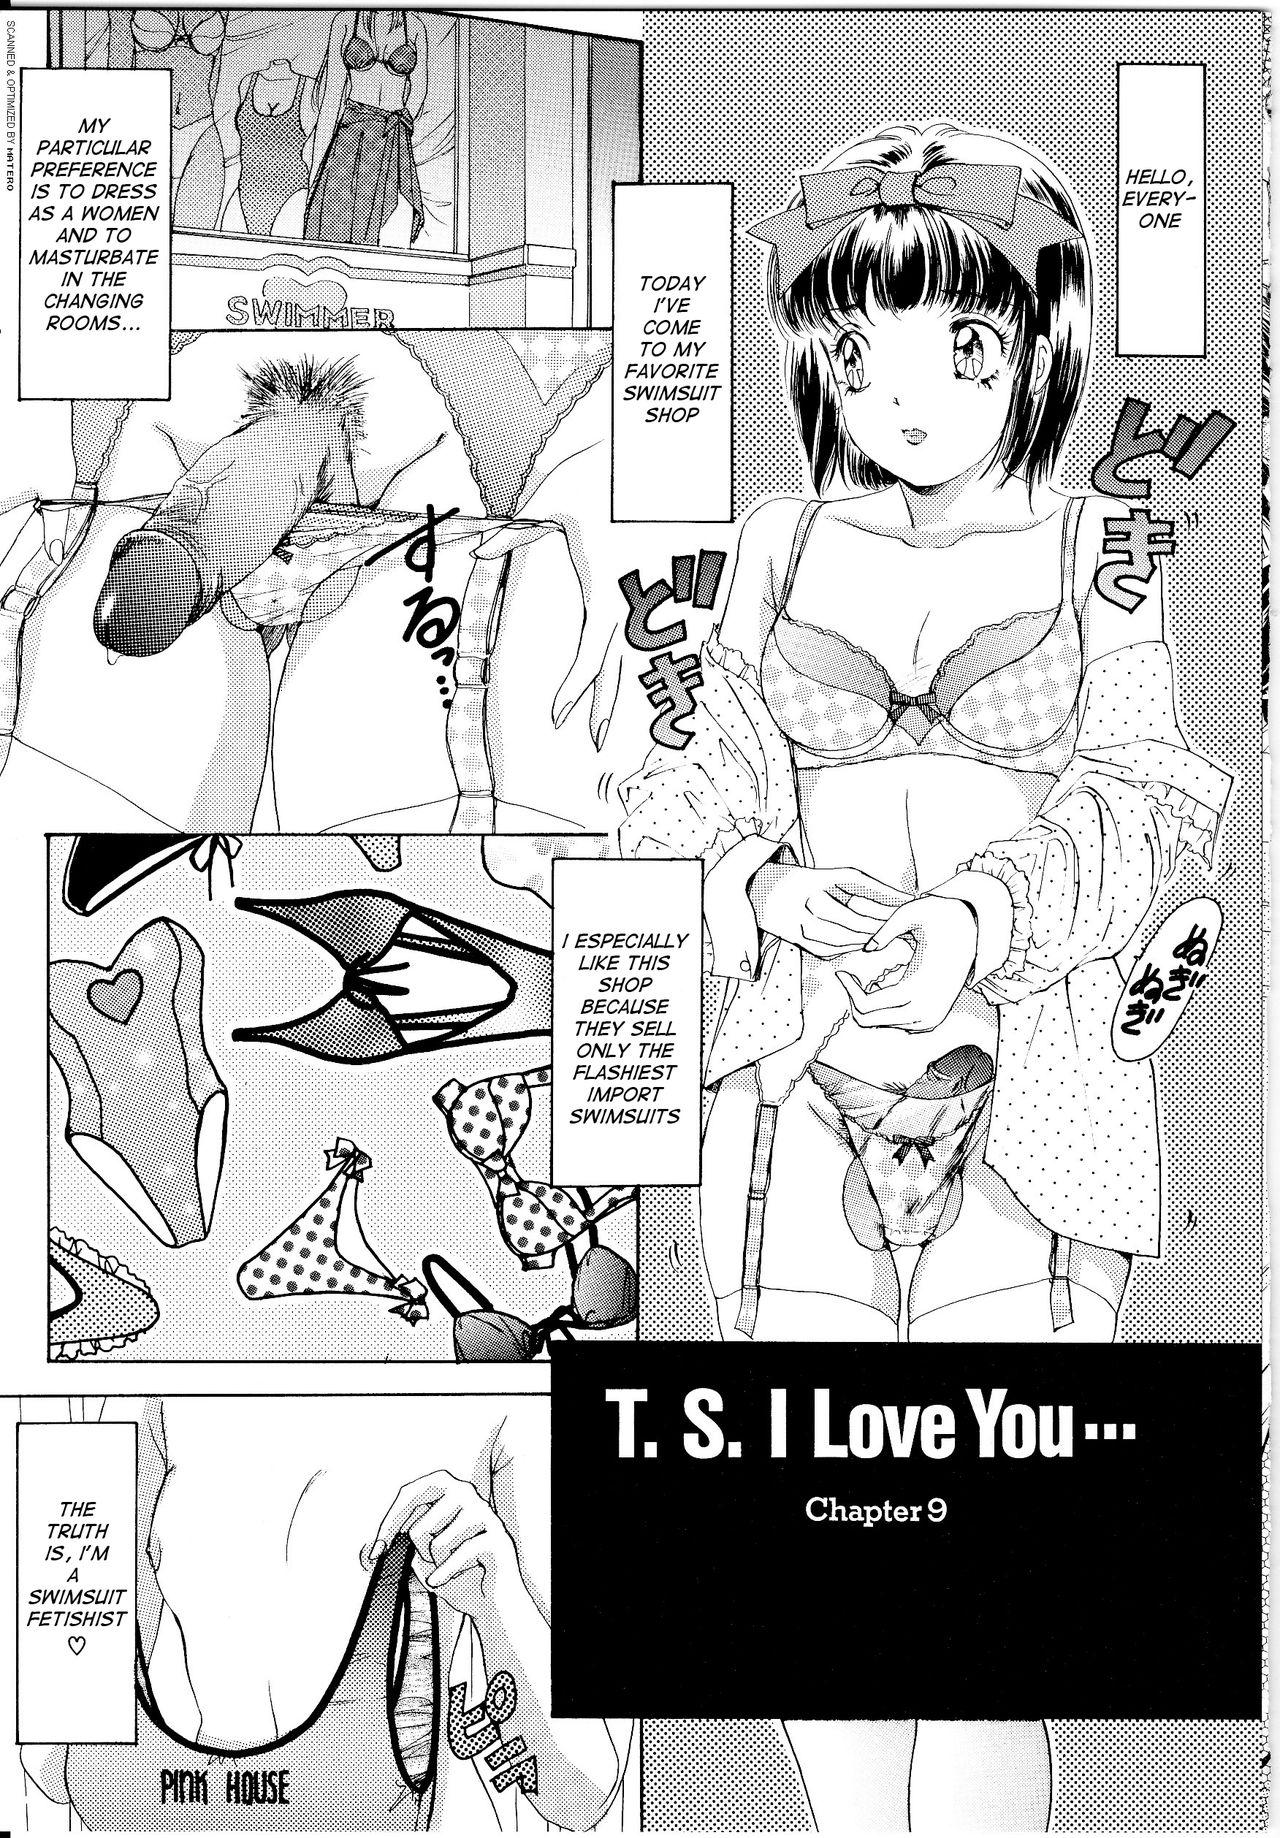 T.S. I LOVE YOU... 1 Ch. 9 1